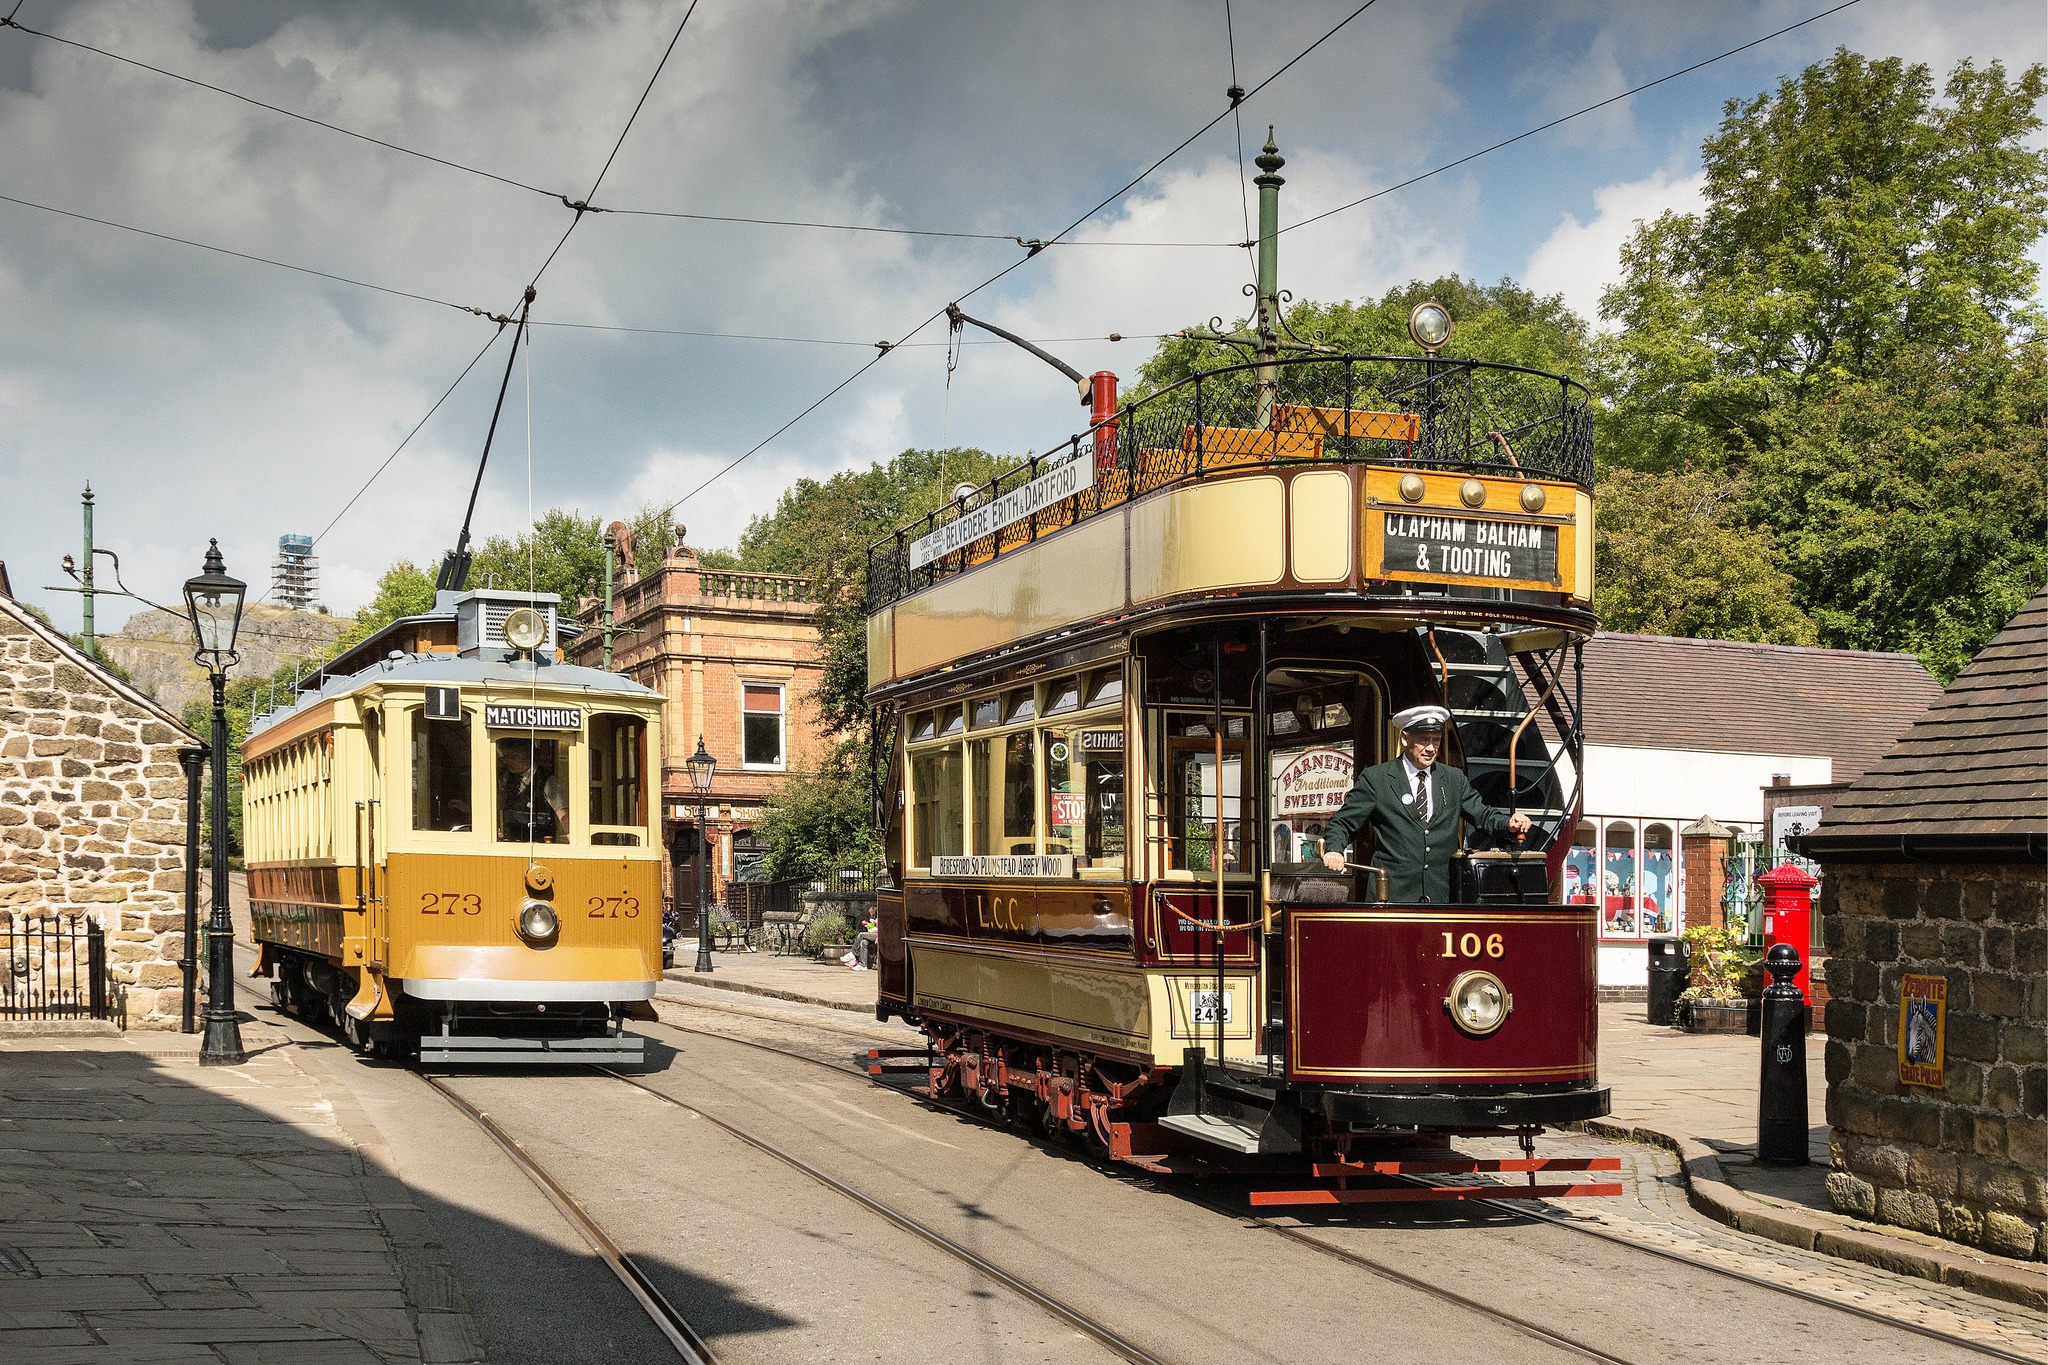 The historic trams and buildings of Crich Tramway Village in the Derbyshire Peak District